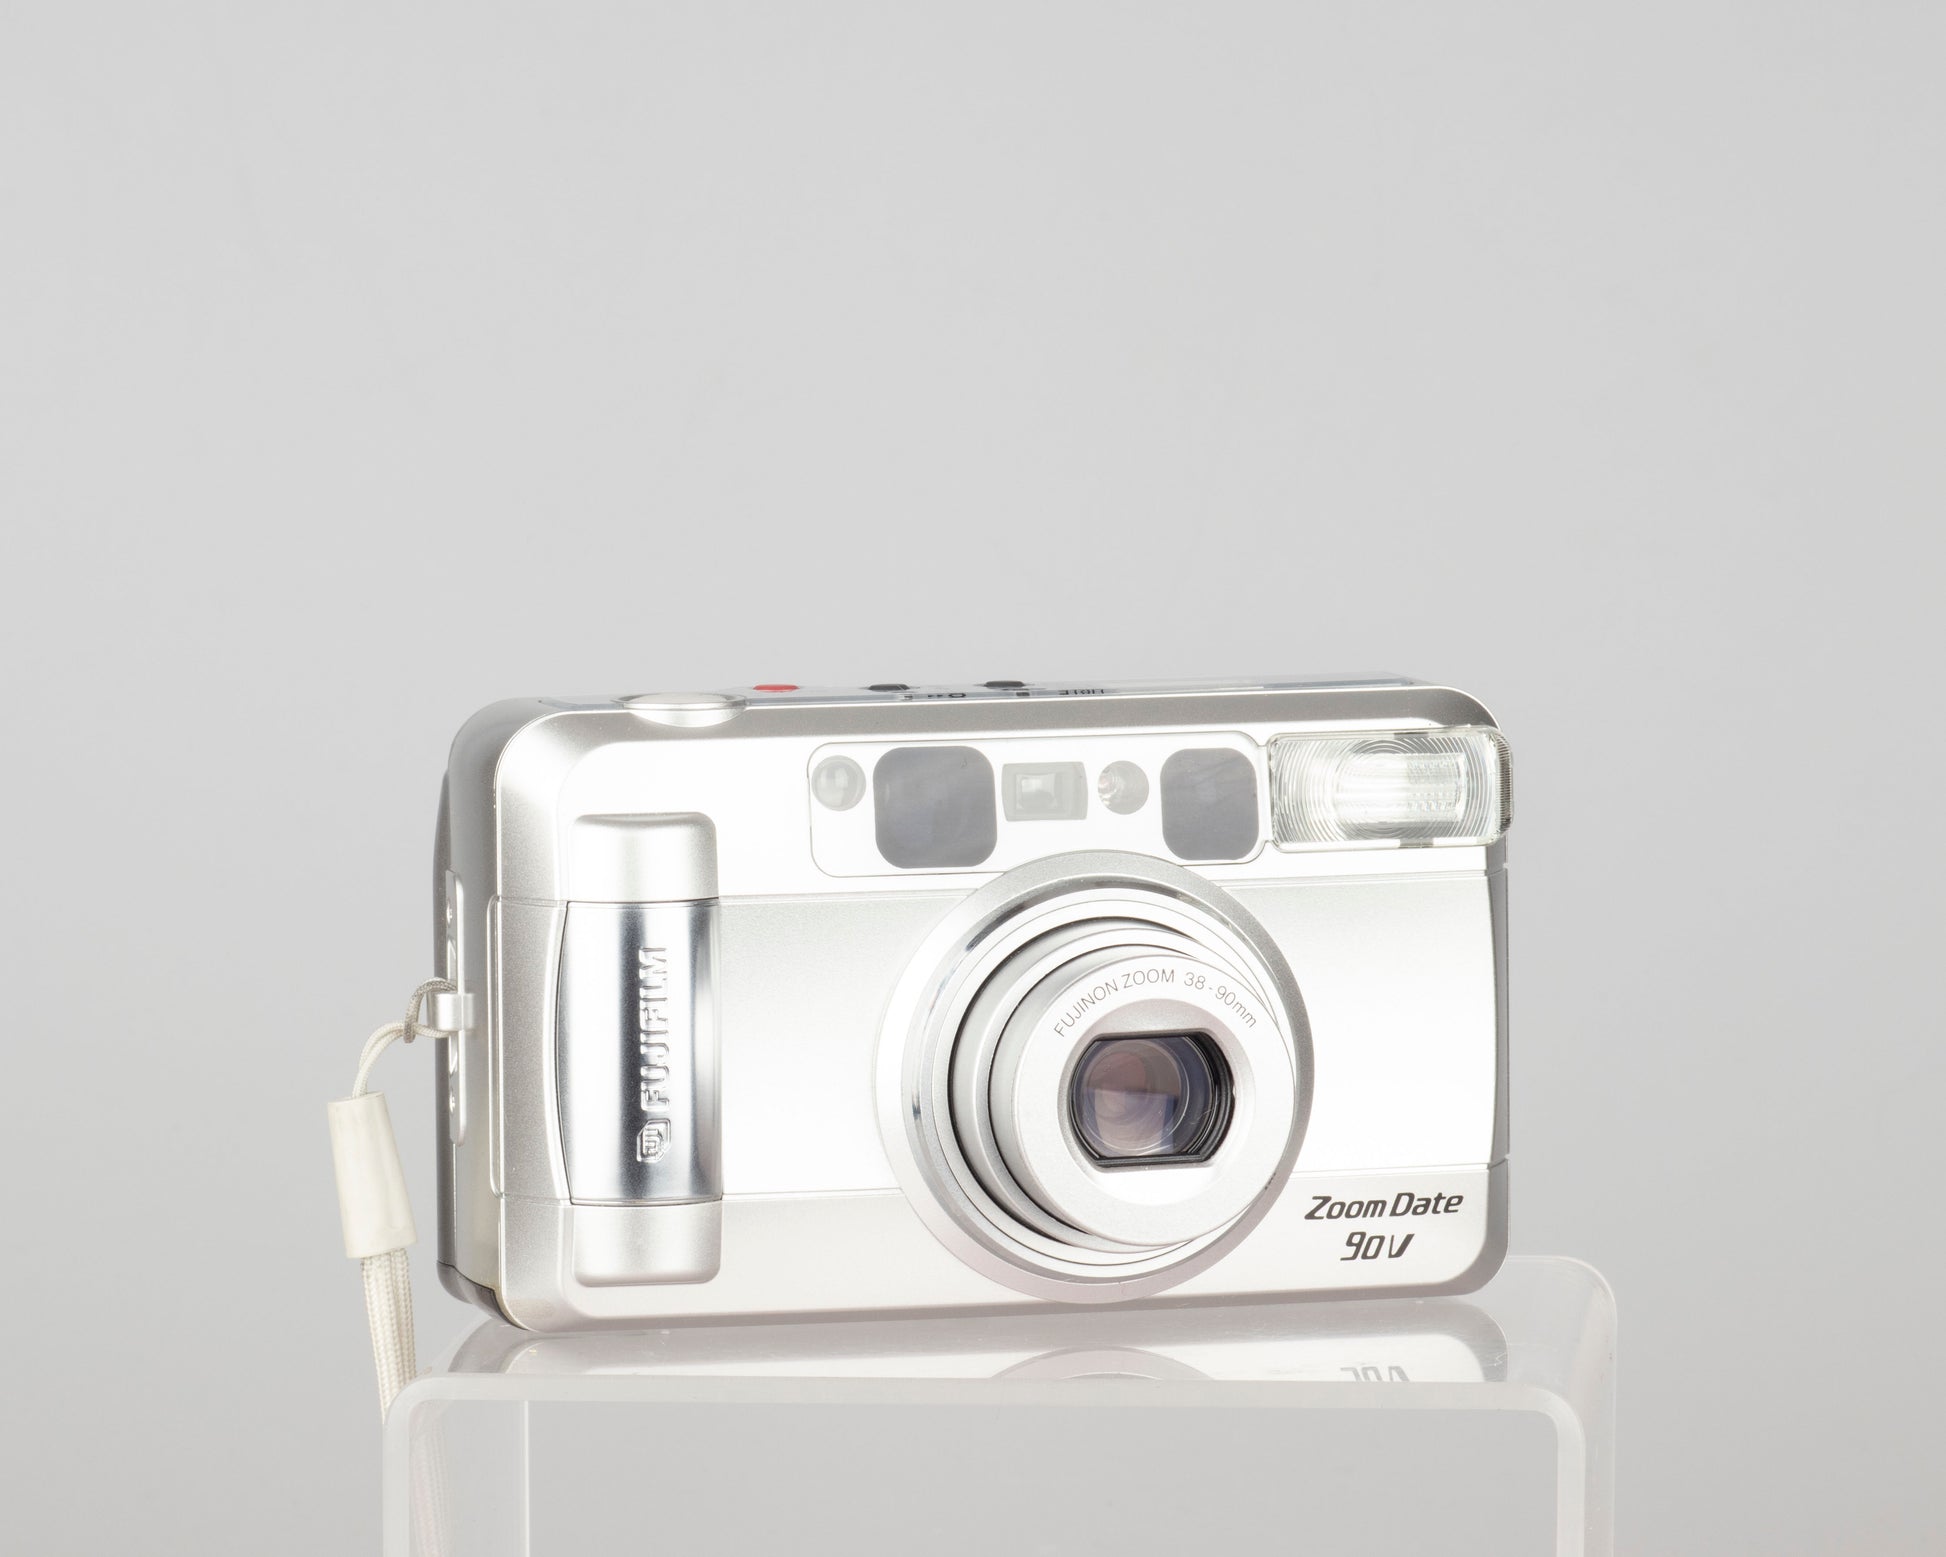 The Fujifilm Zoom Date 90V is a compact 35mm point-and-shoot camera from the early 2000s